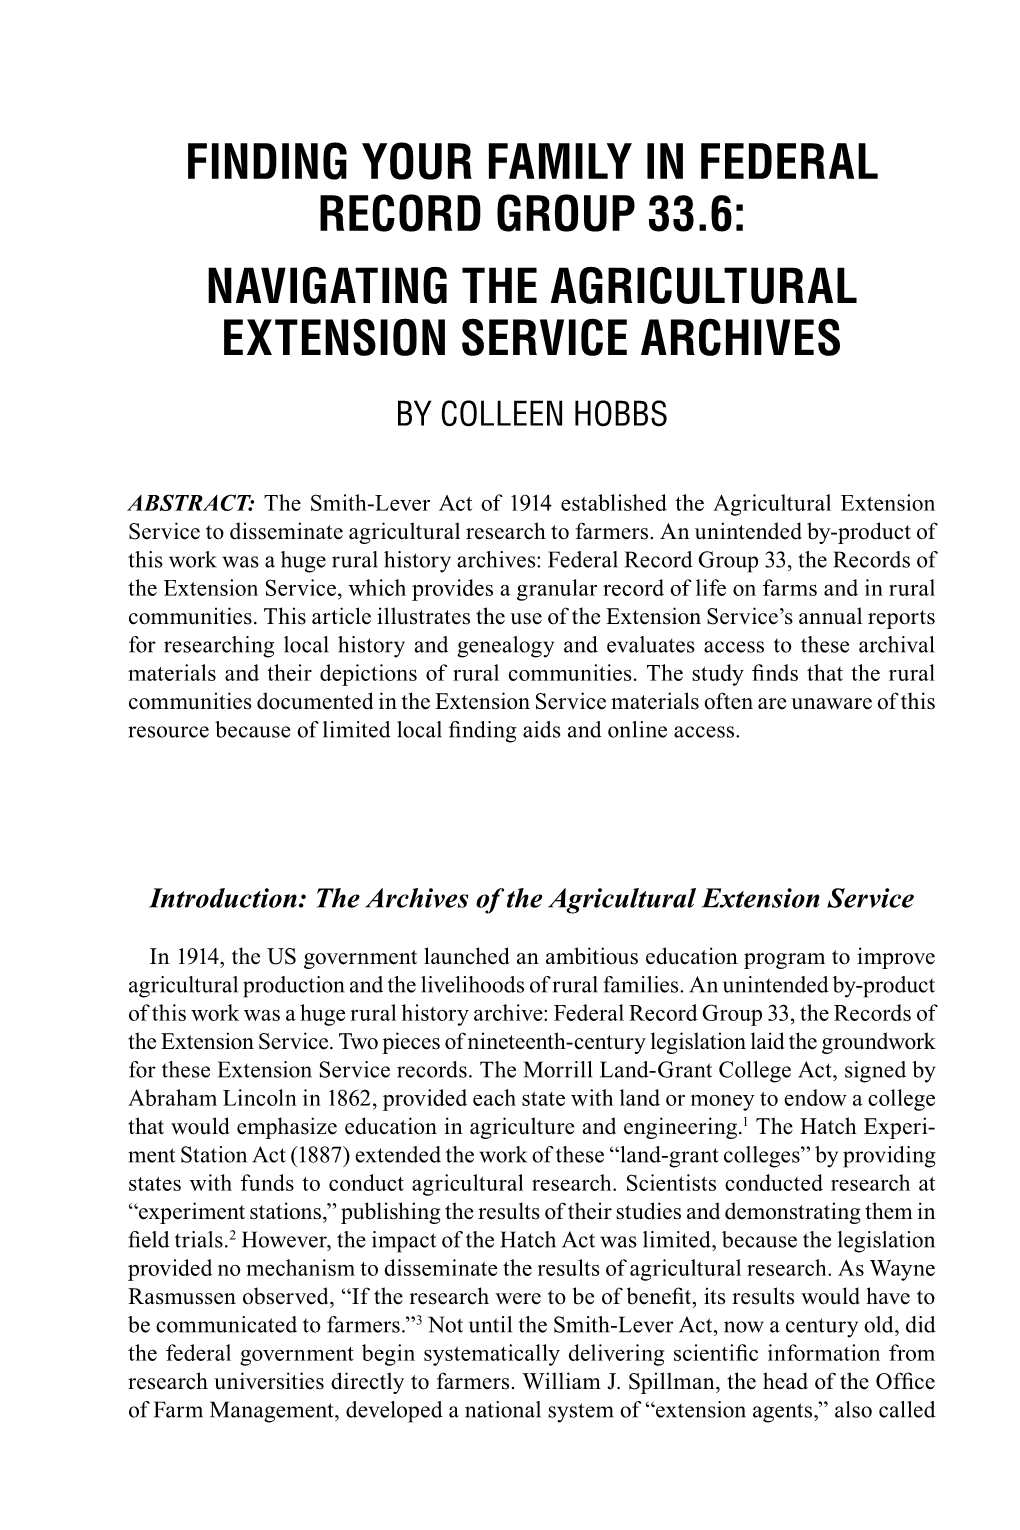 Navigating the Agricultural Extension Service Archives